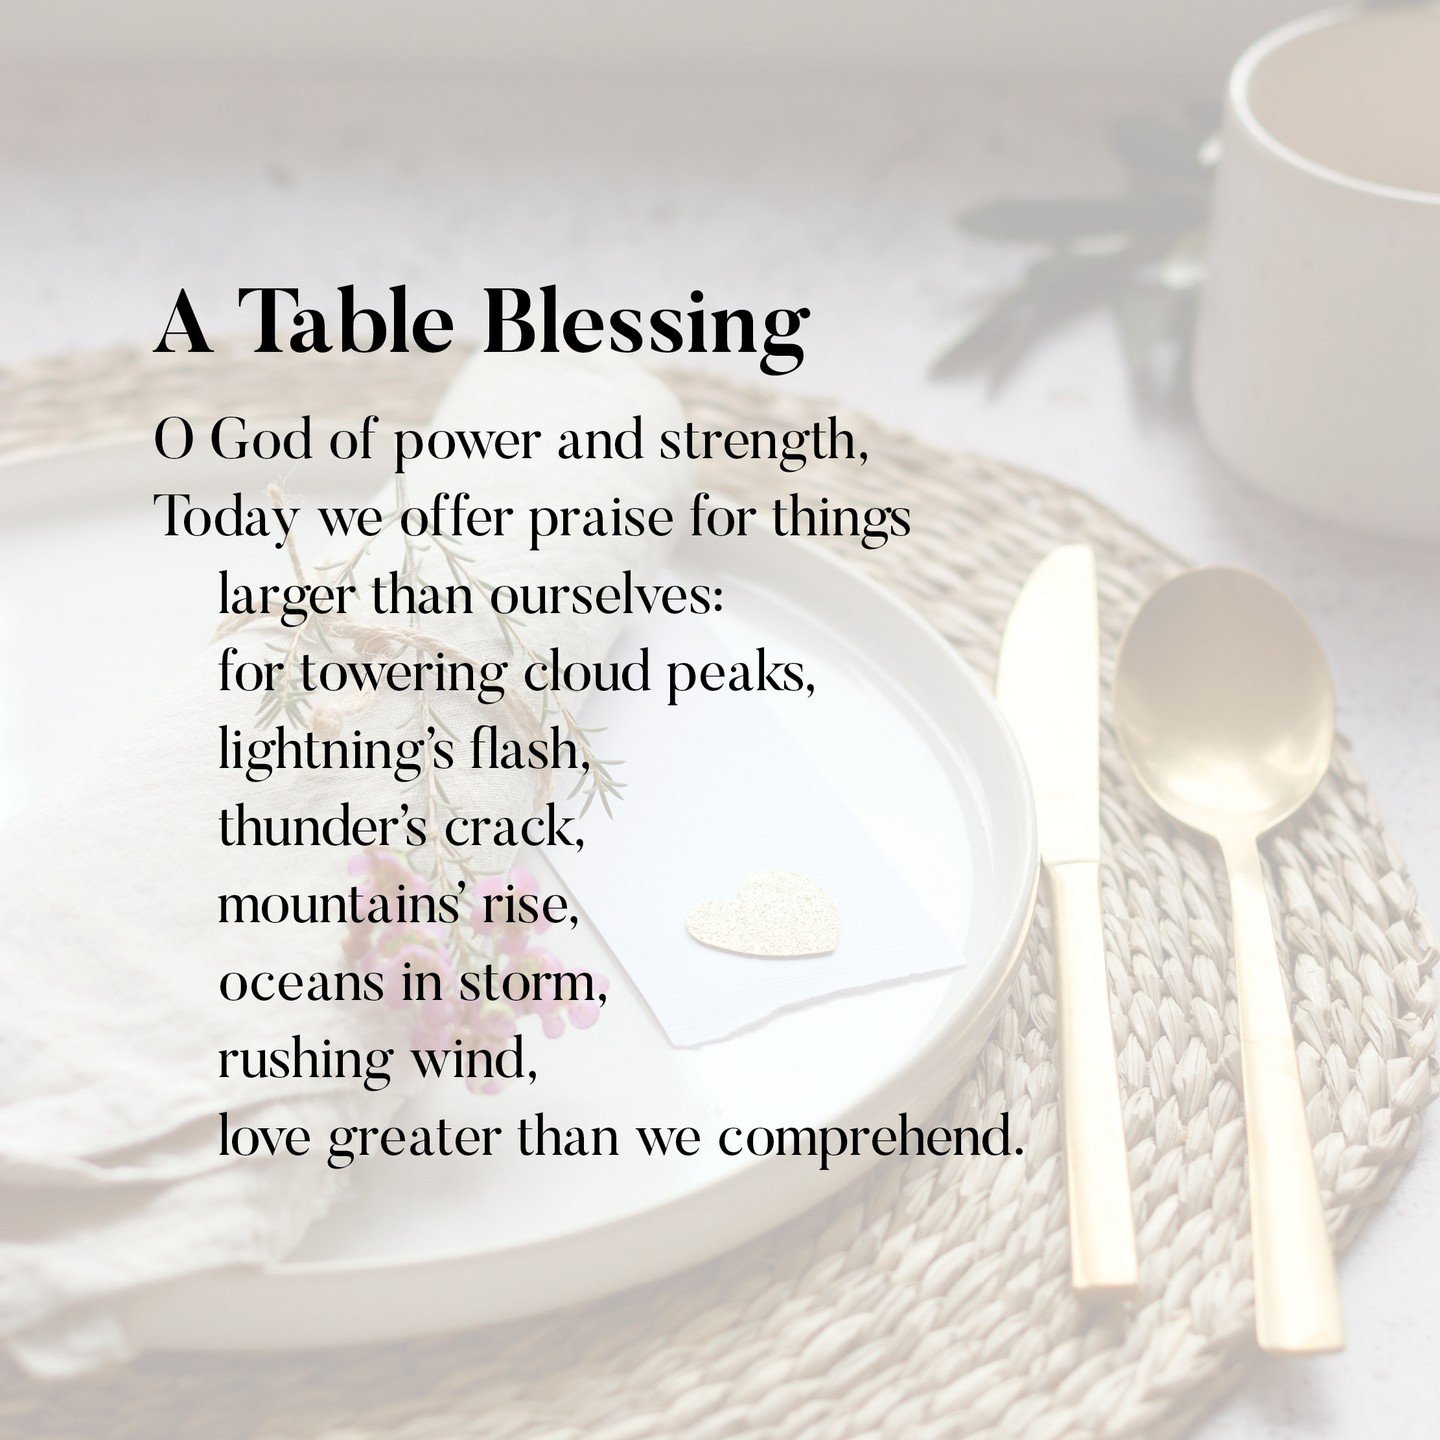 On this autumn Friday, here is an adaptation of 'A Liturgy for Friday's Table Blessing' from 'Every Moment Holy: Volume VI' by Douglas Kane McKelvey (a favourite of ours here at CBA). We hope it blesses you 🙏